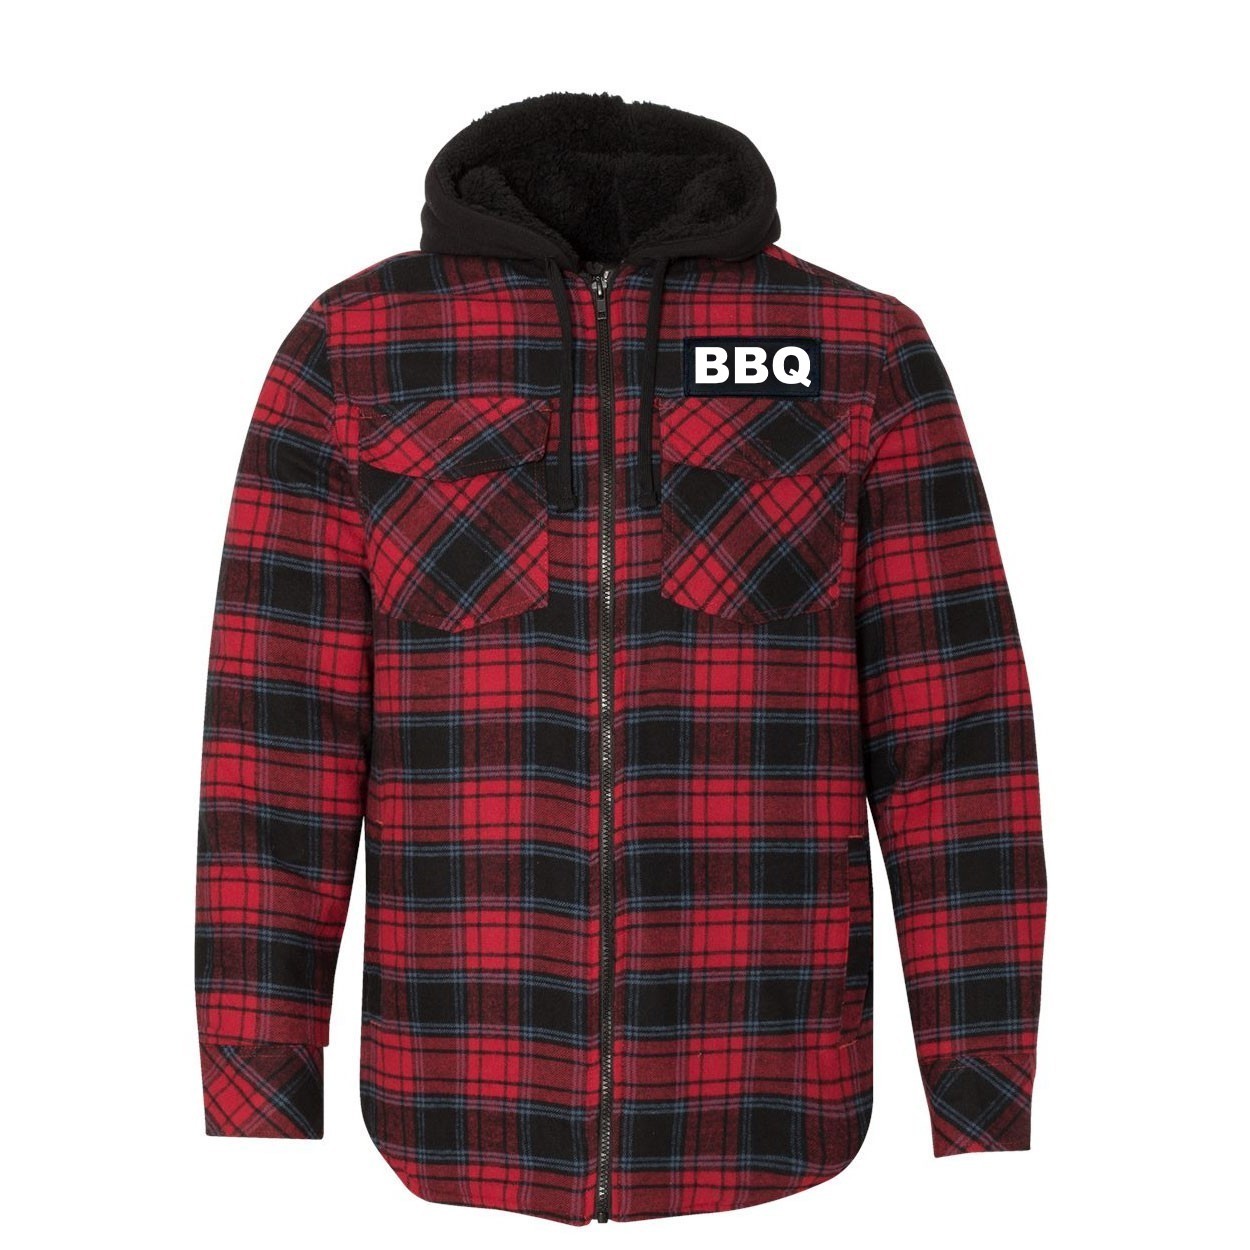 BBQ Brand Logo Classic Unisex Full Zip Woven Patch Hooded Flannel Jacket Red/Black Buffalo (White Logo)